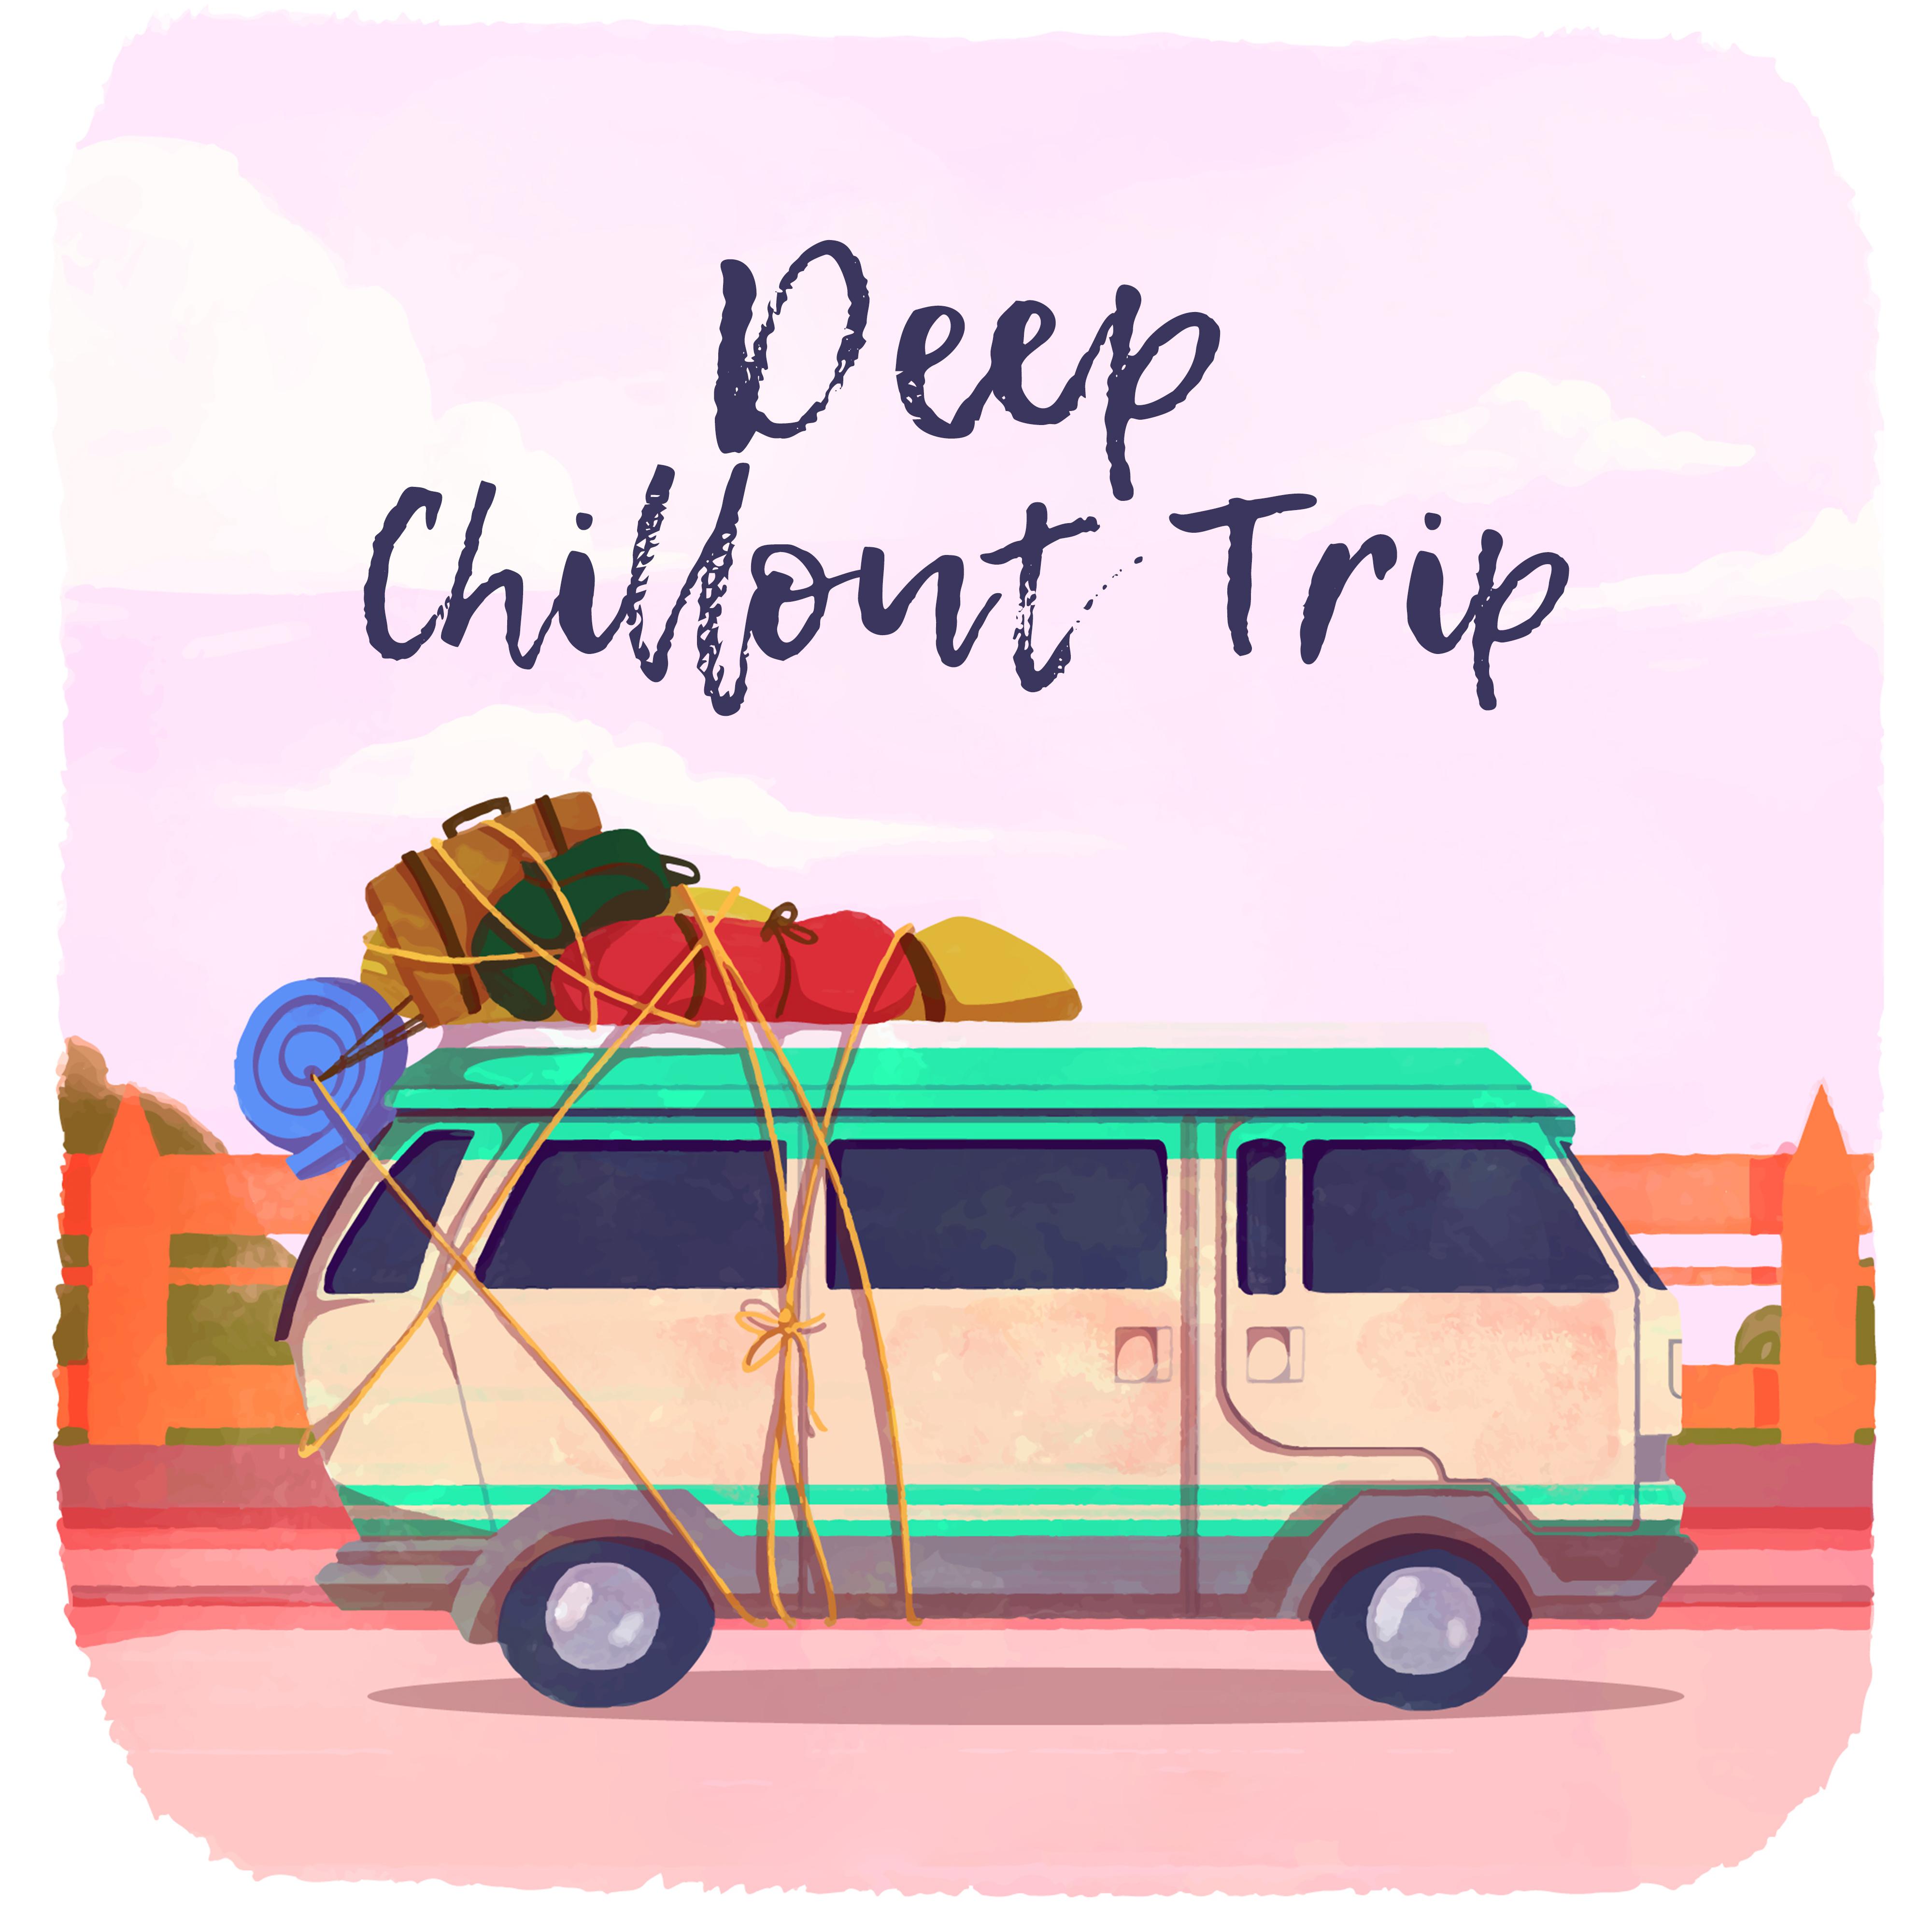 Deep Chillout Trip